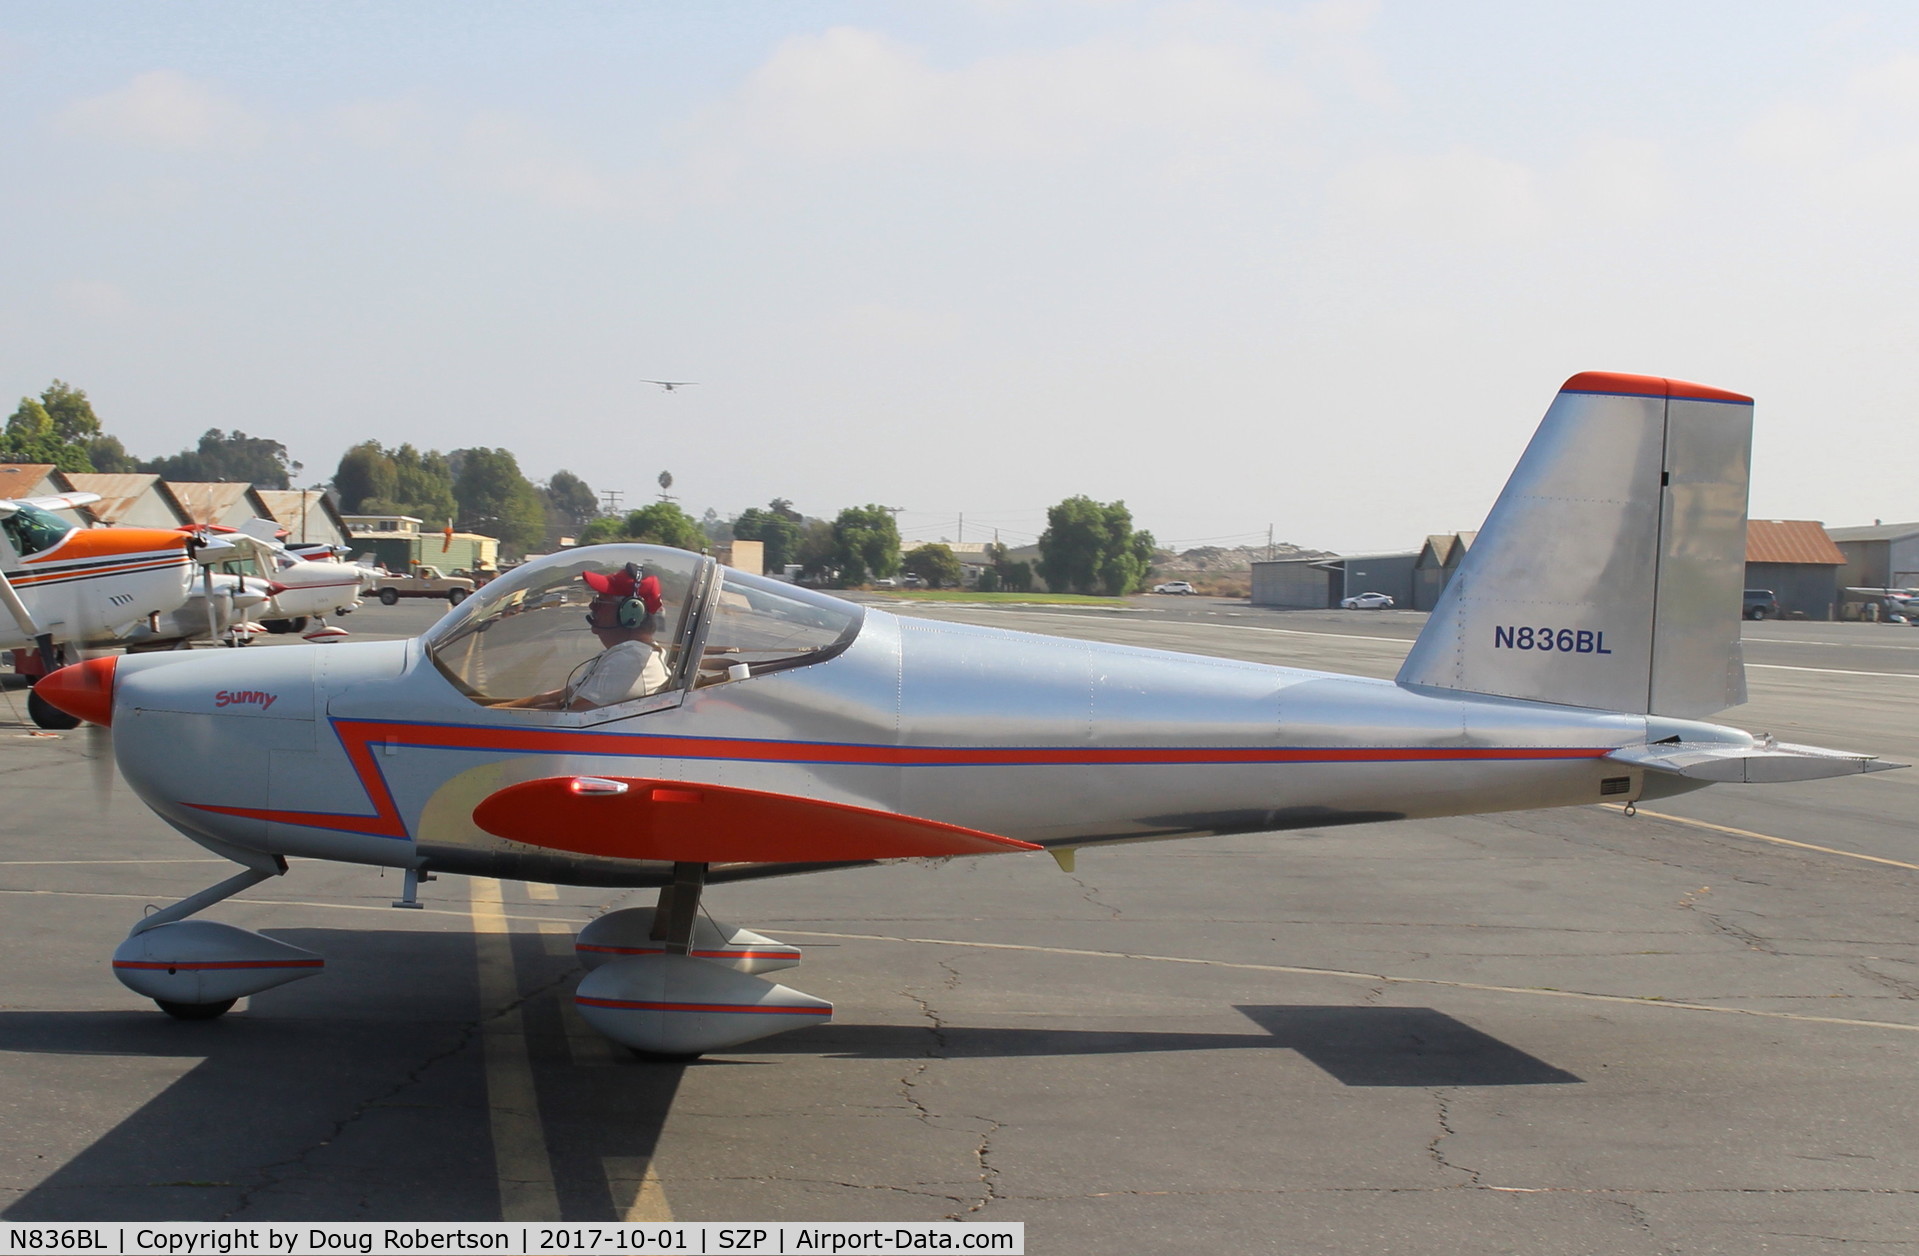 N836BL, 2016 Vans RV-12 C/N 120836, 2016 Lang VAN's RV-12A 'Sunny' E-LSA, Rotax 912-ULS 100 Hp, taxi to transient ramp